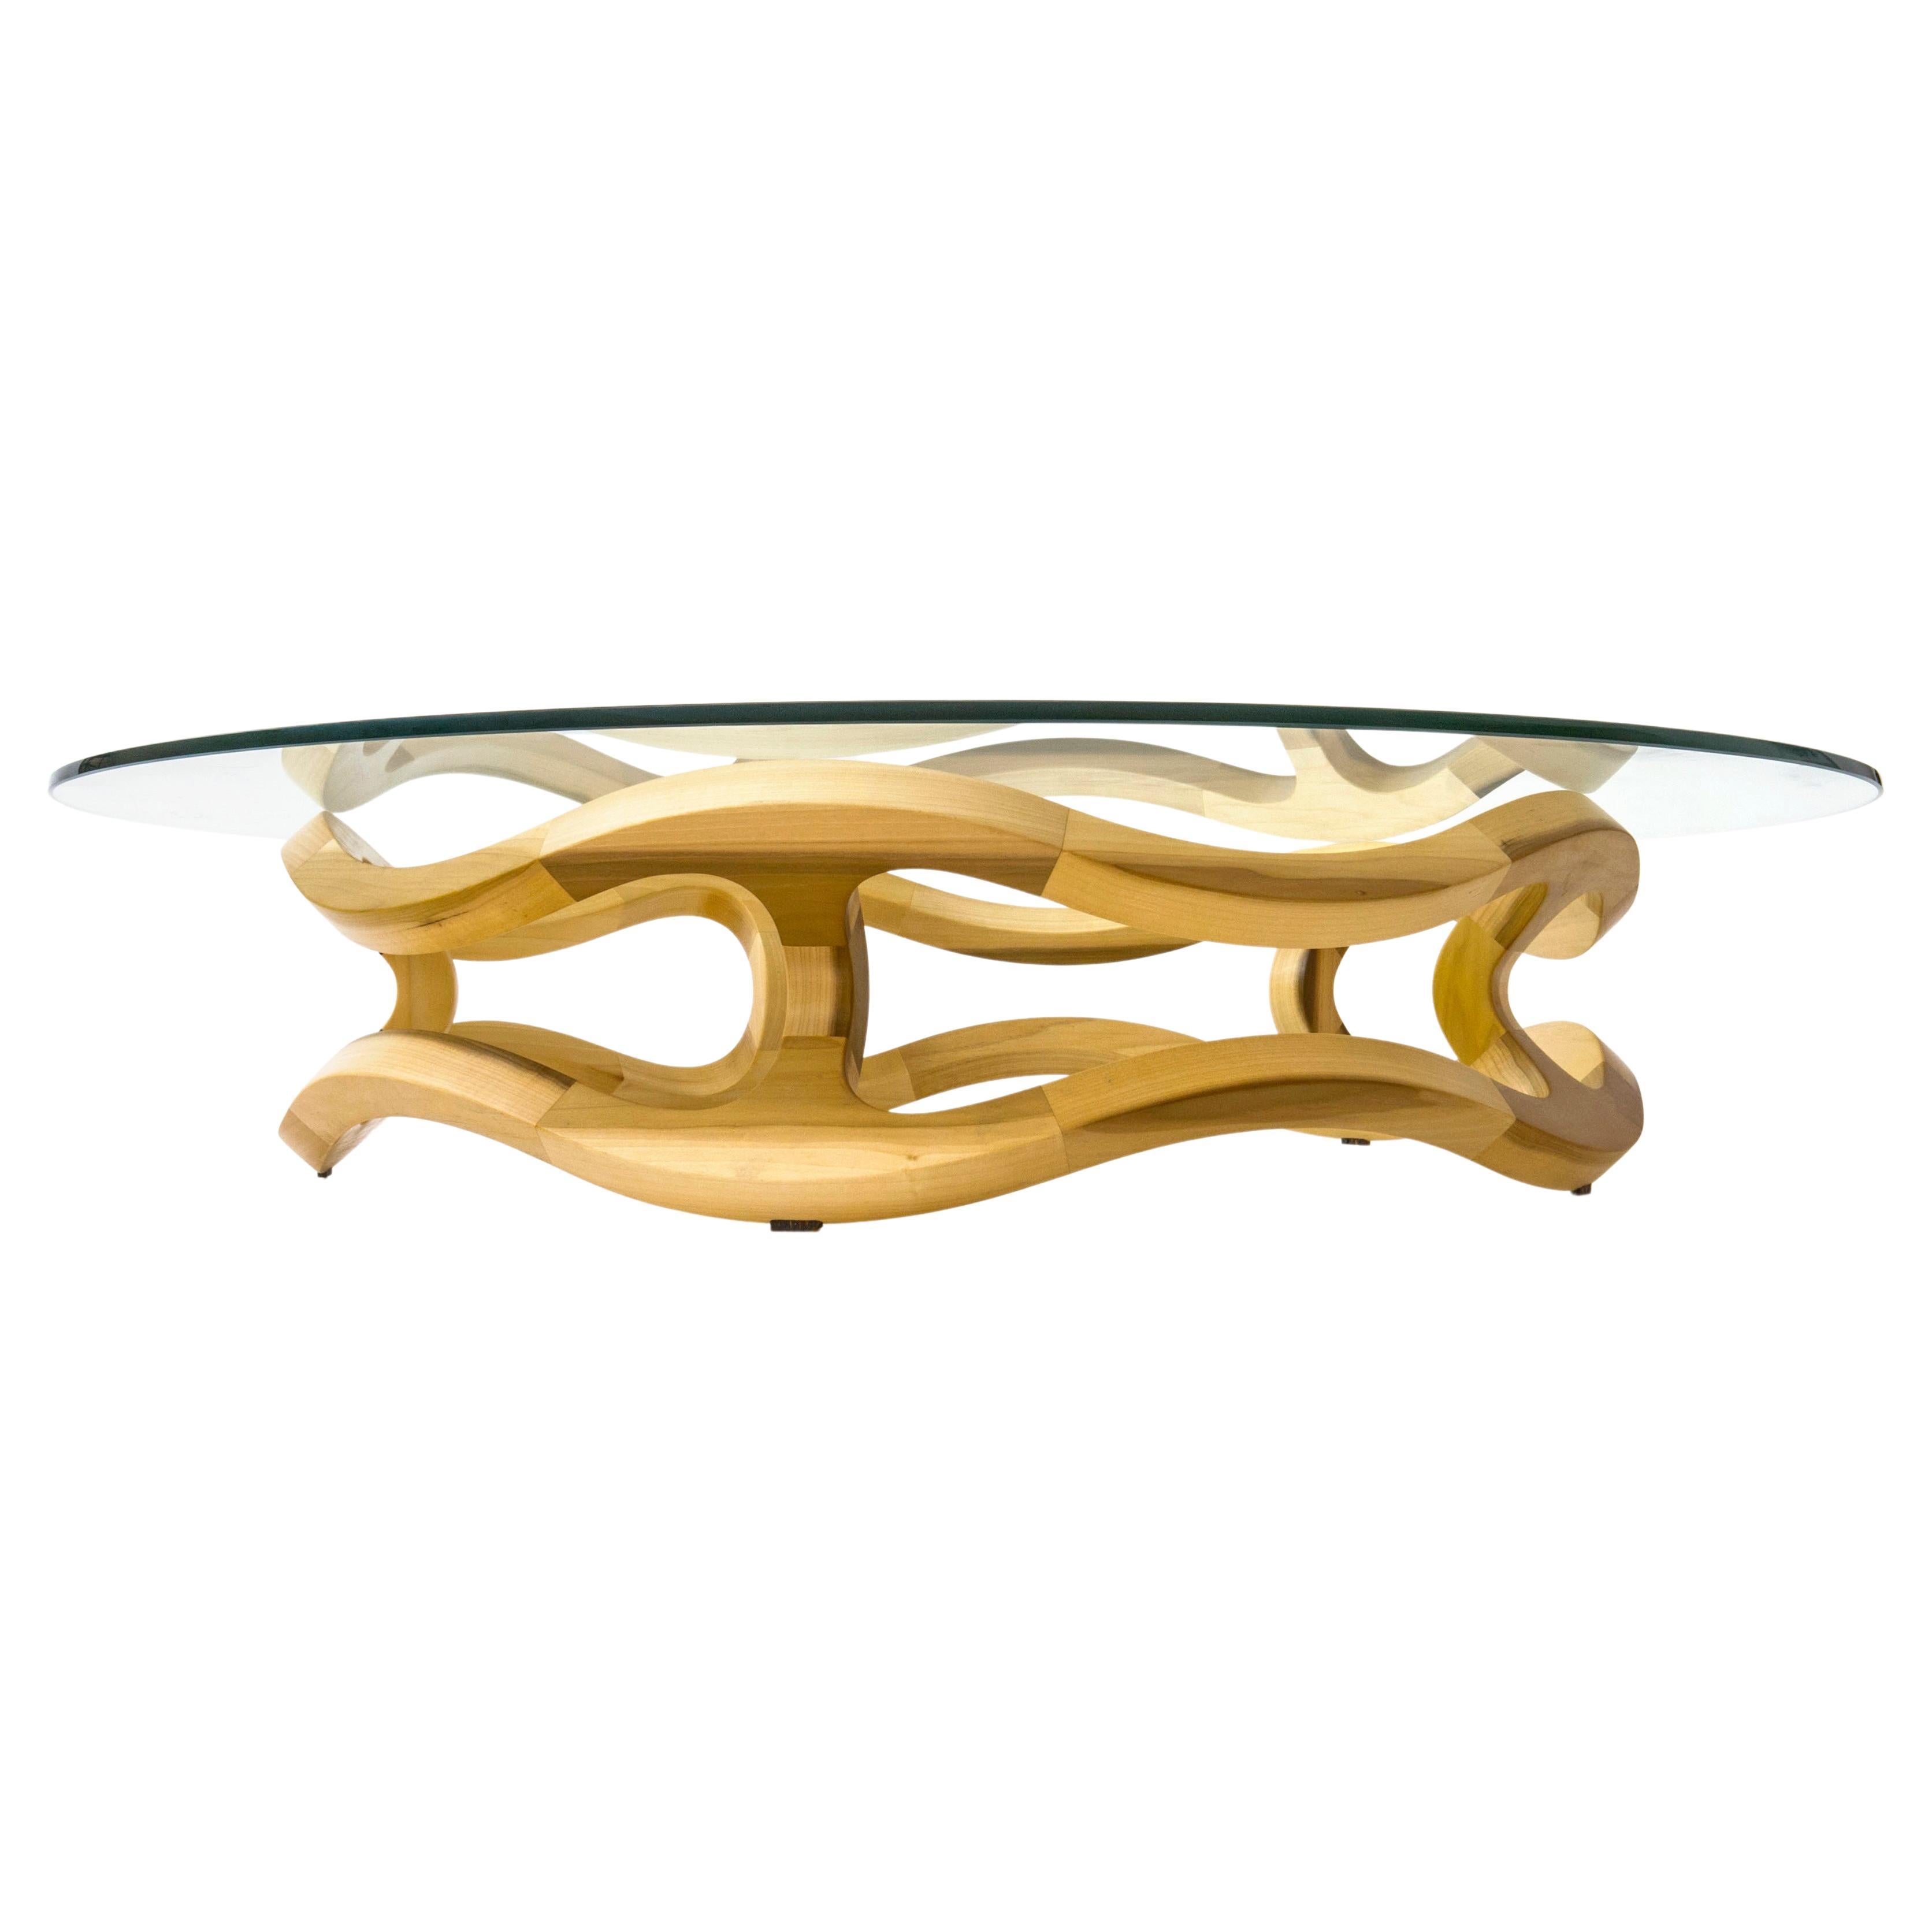 Flamenca, Geometric Sculptural Center Table Made of Solid Wood by Pedro Cerisola